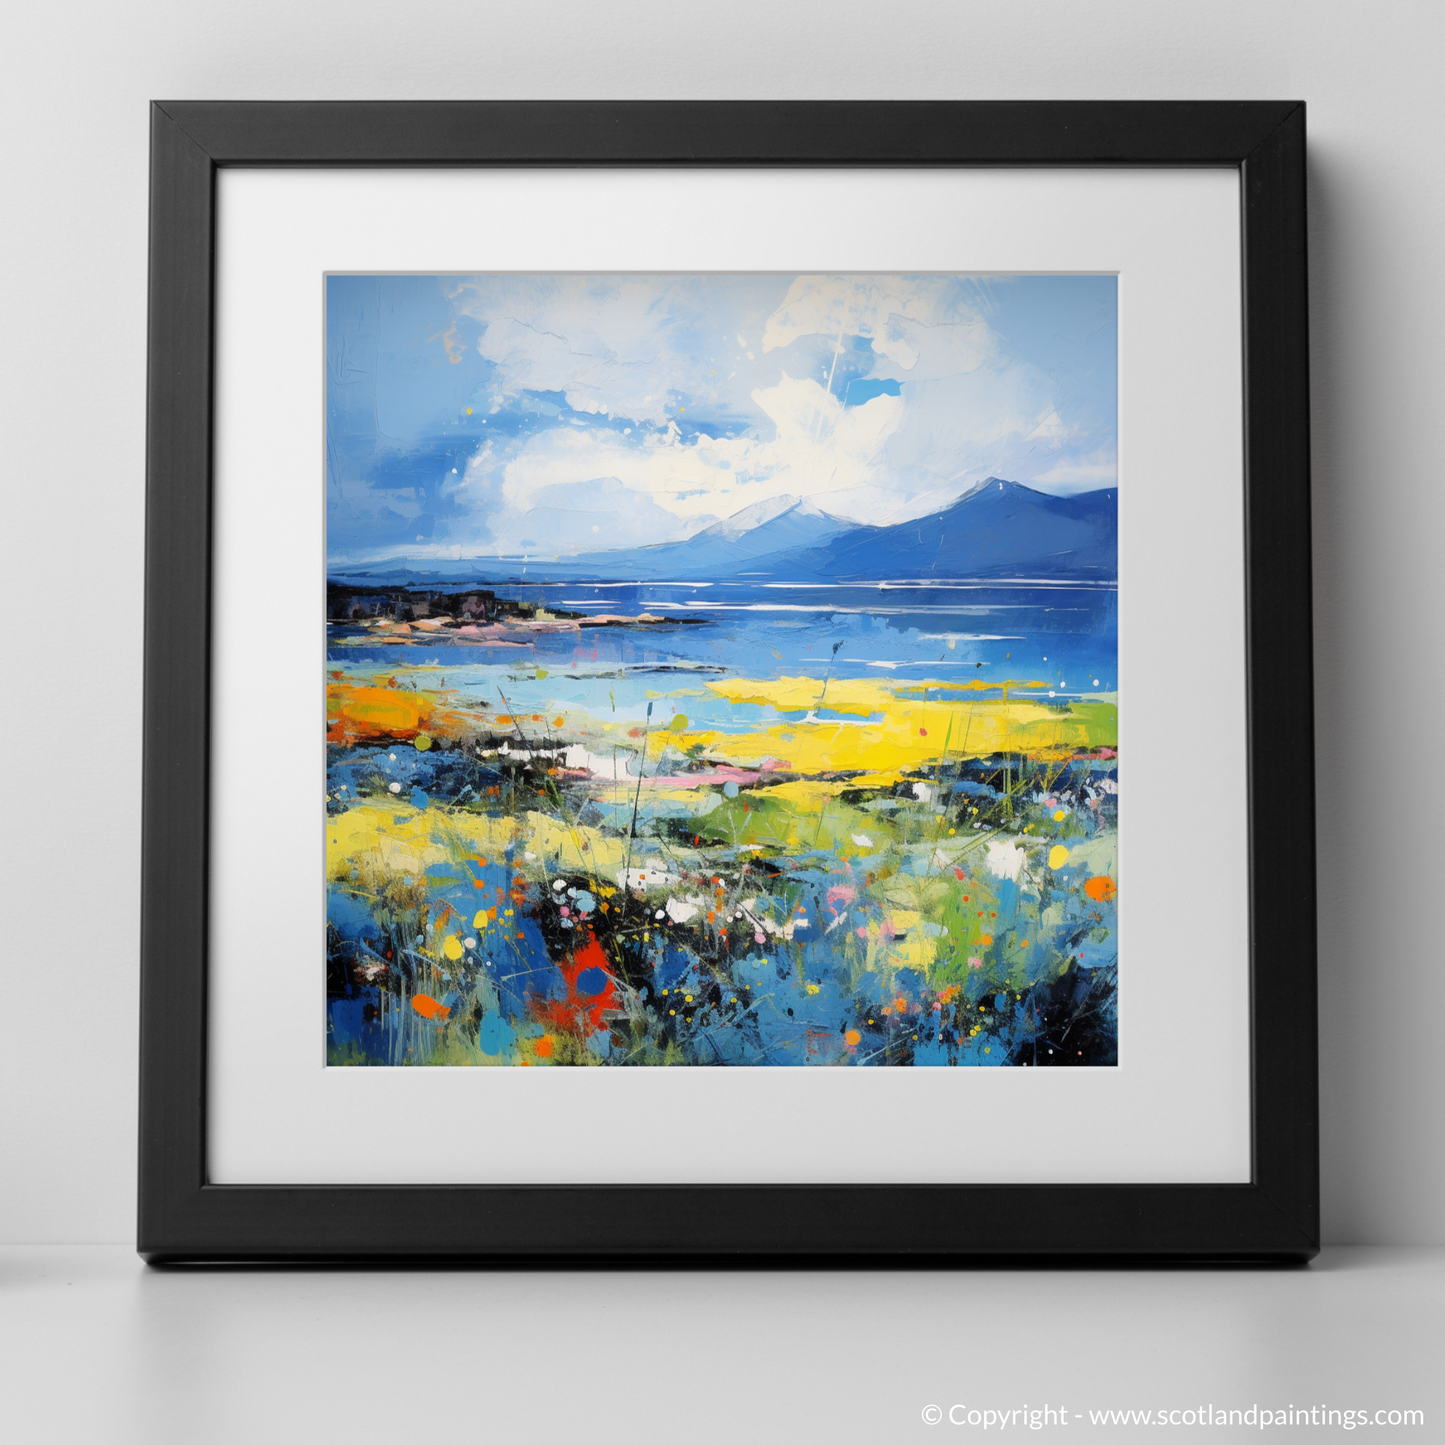 Painting and Art Print of Isle of Arran, Firth of Clyde in summer. Abstract Arran Summerscape.